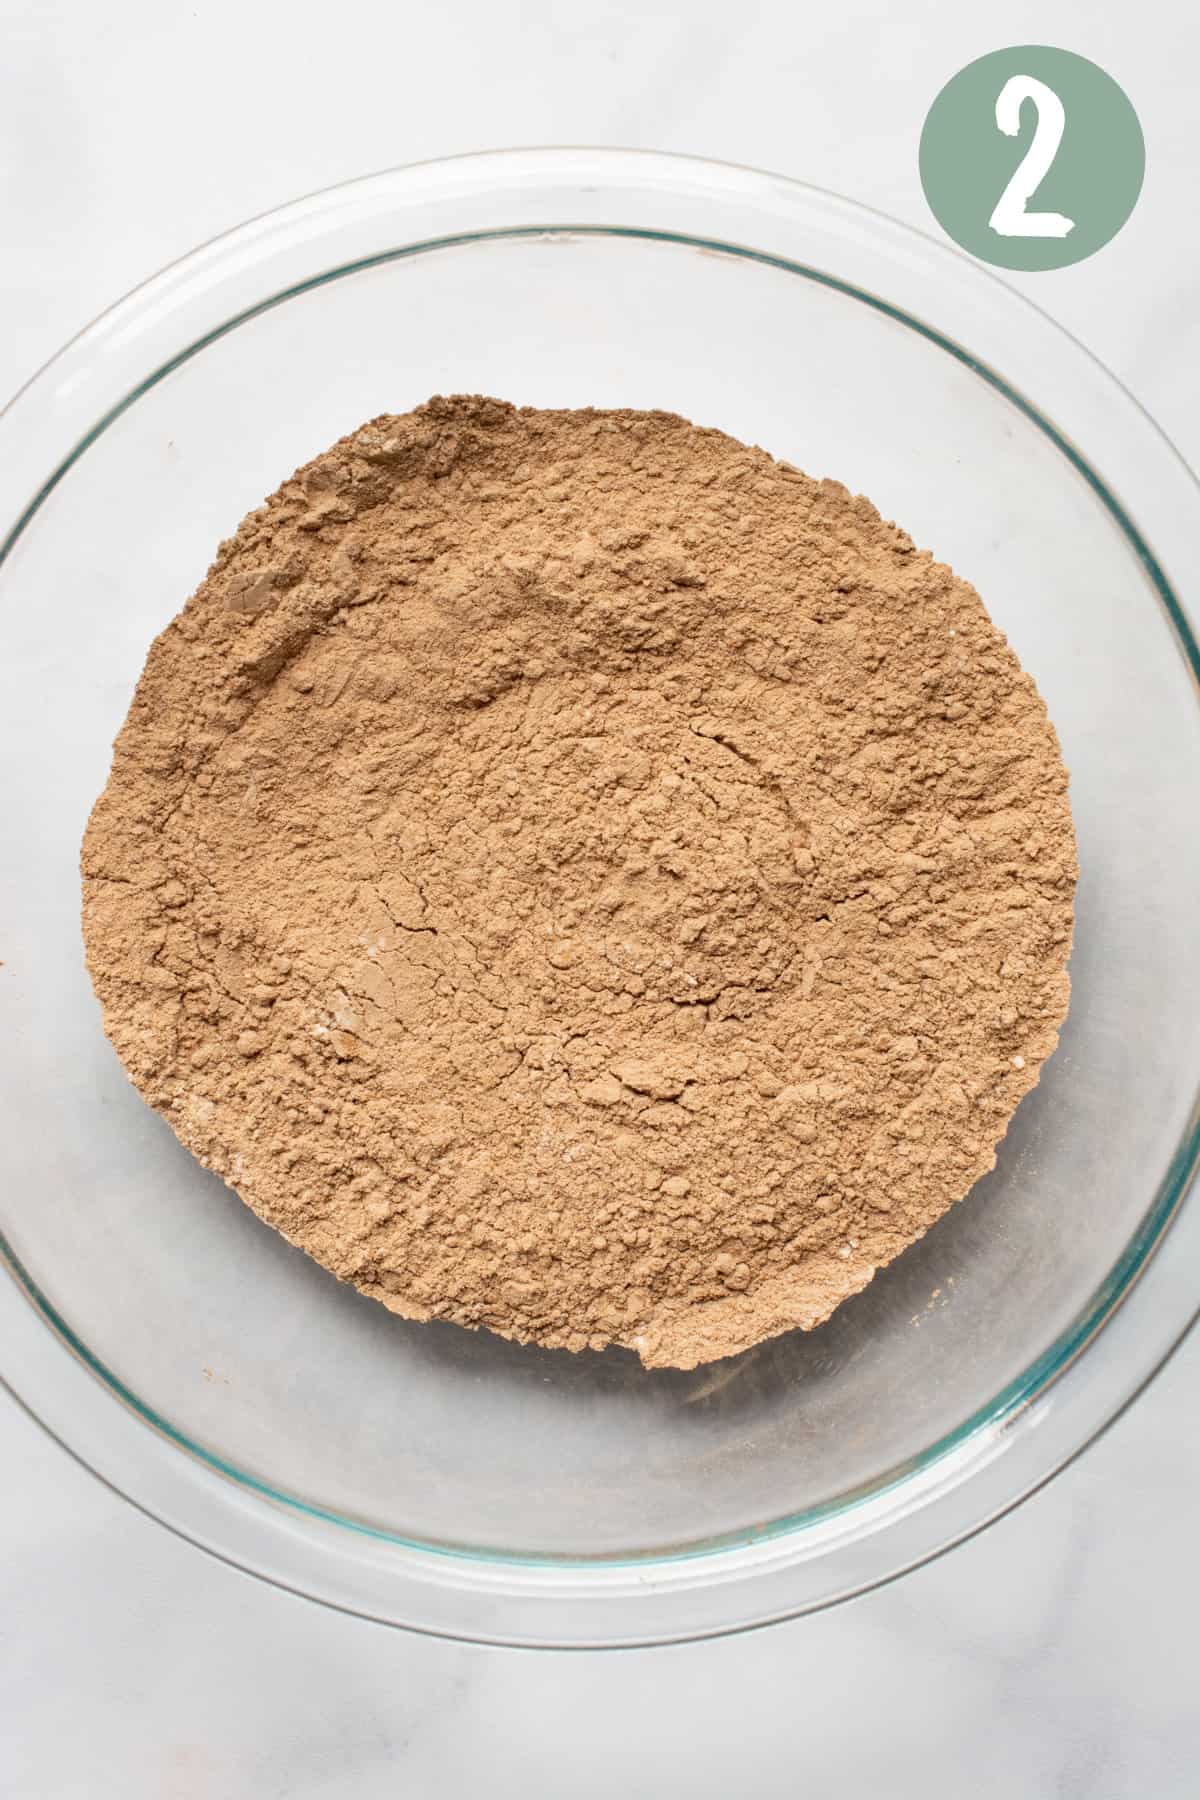 Flour, cocoa powder, salt, and baking powder mixed in a glass bowl.